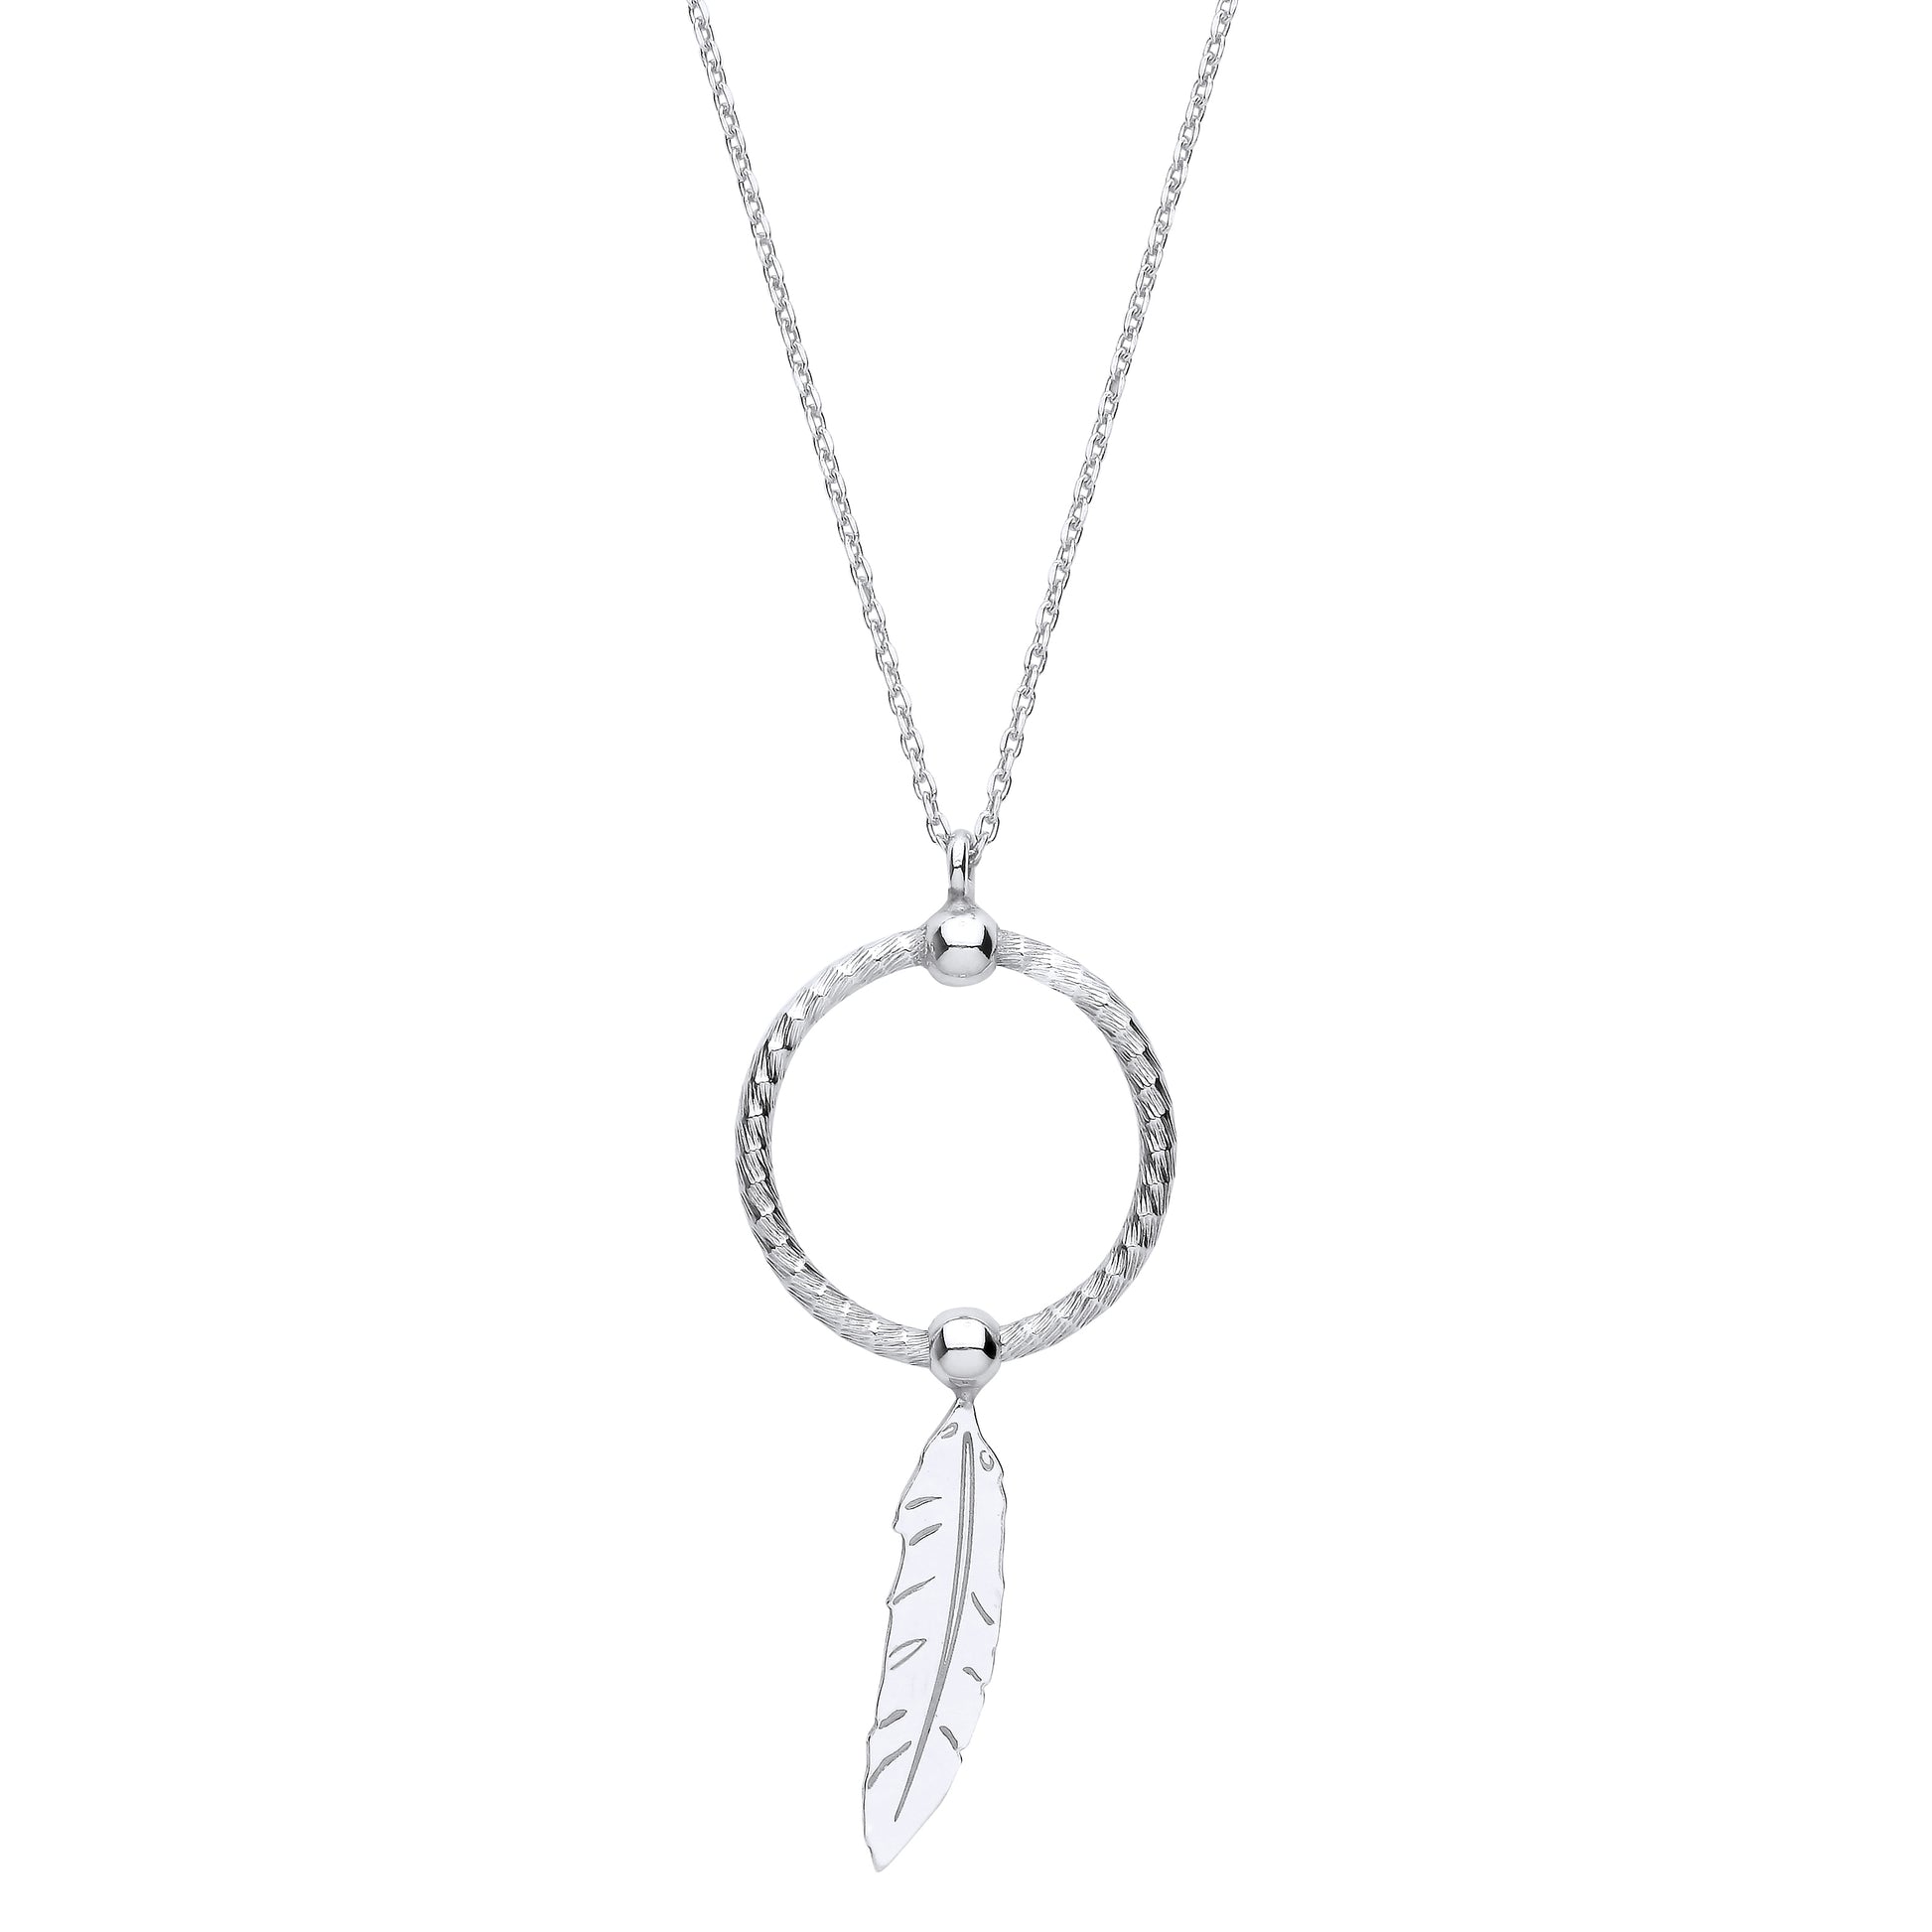 Silver  Circle & Leaf Necklace - GVK416